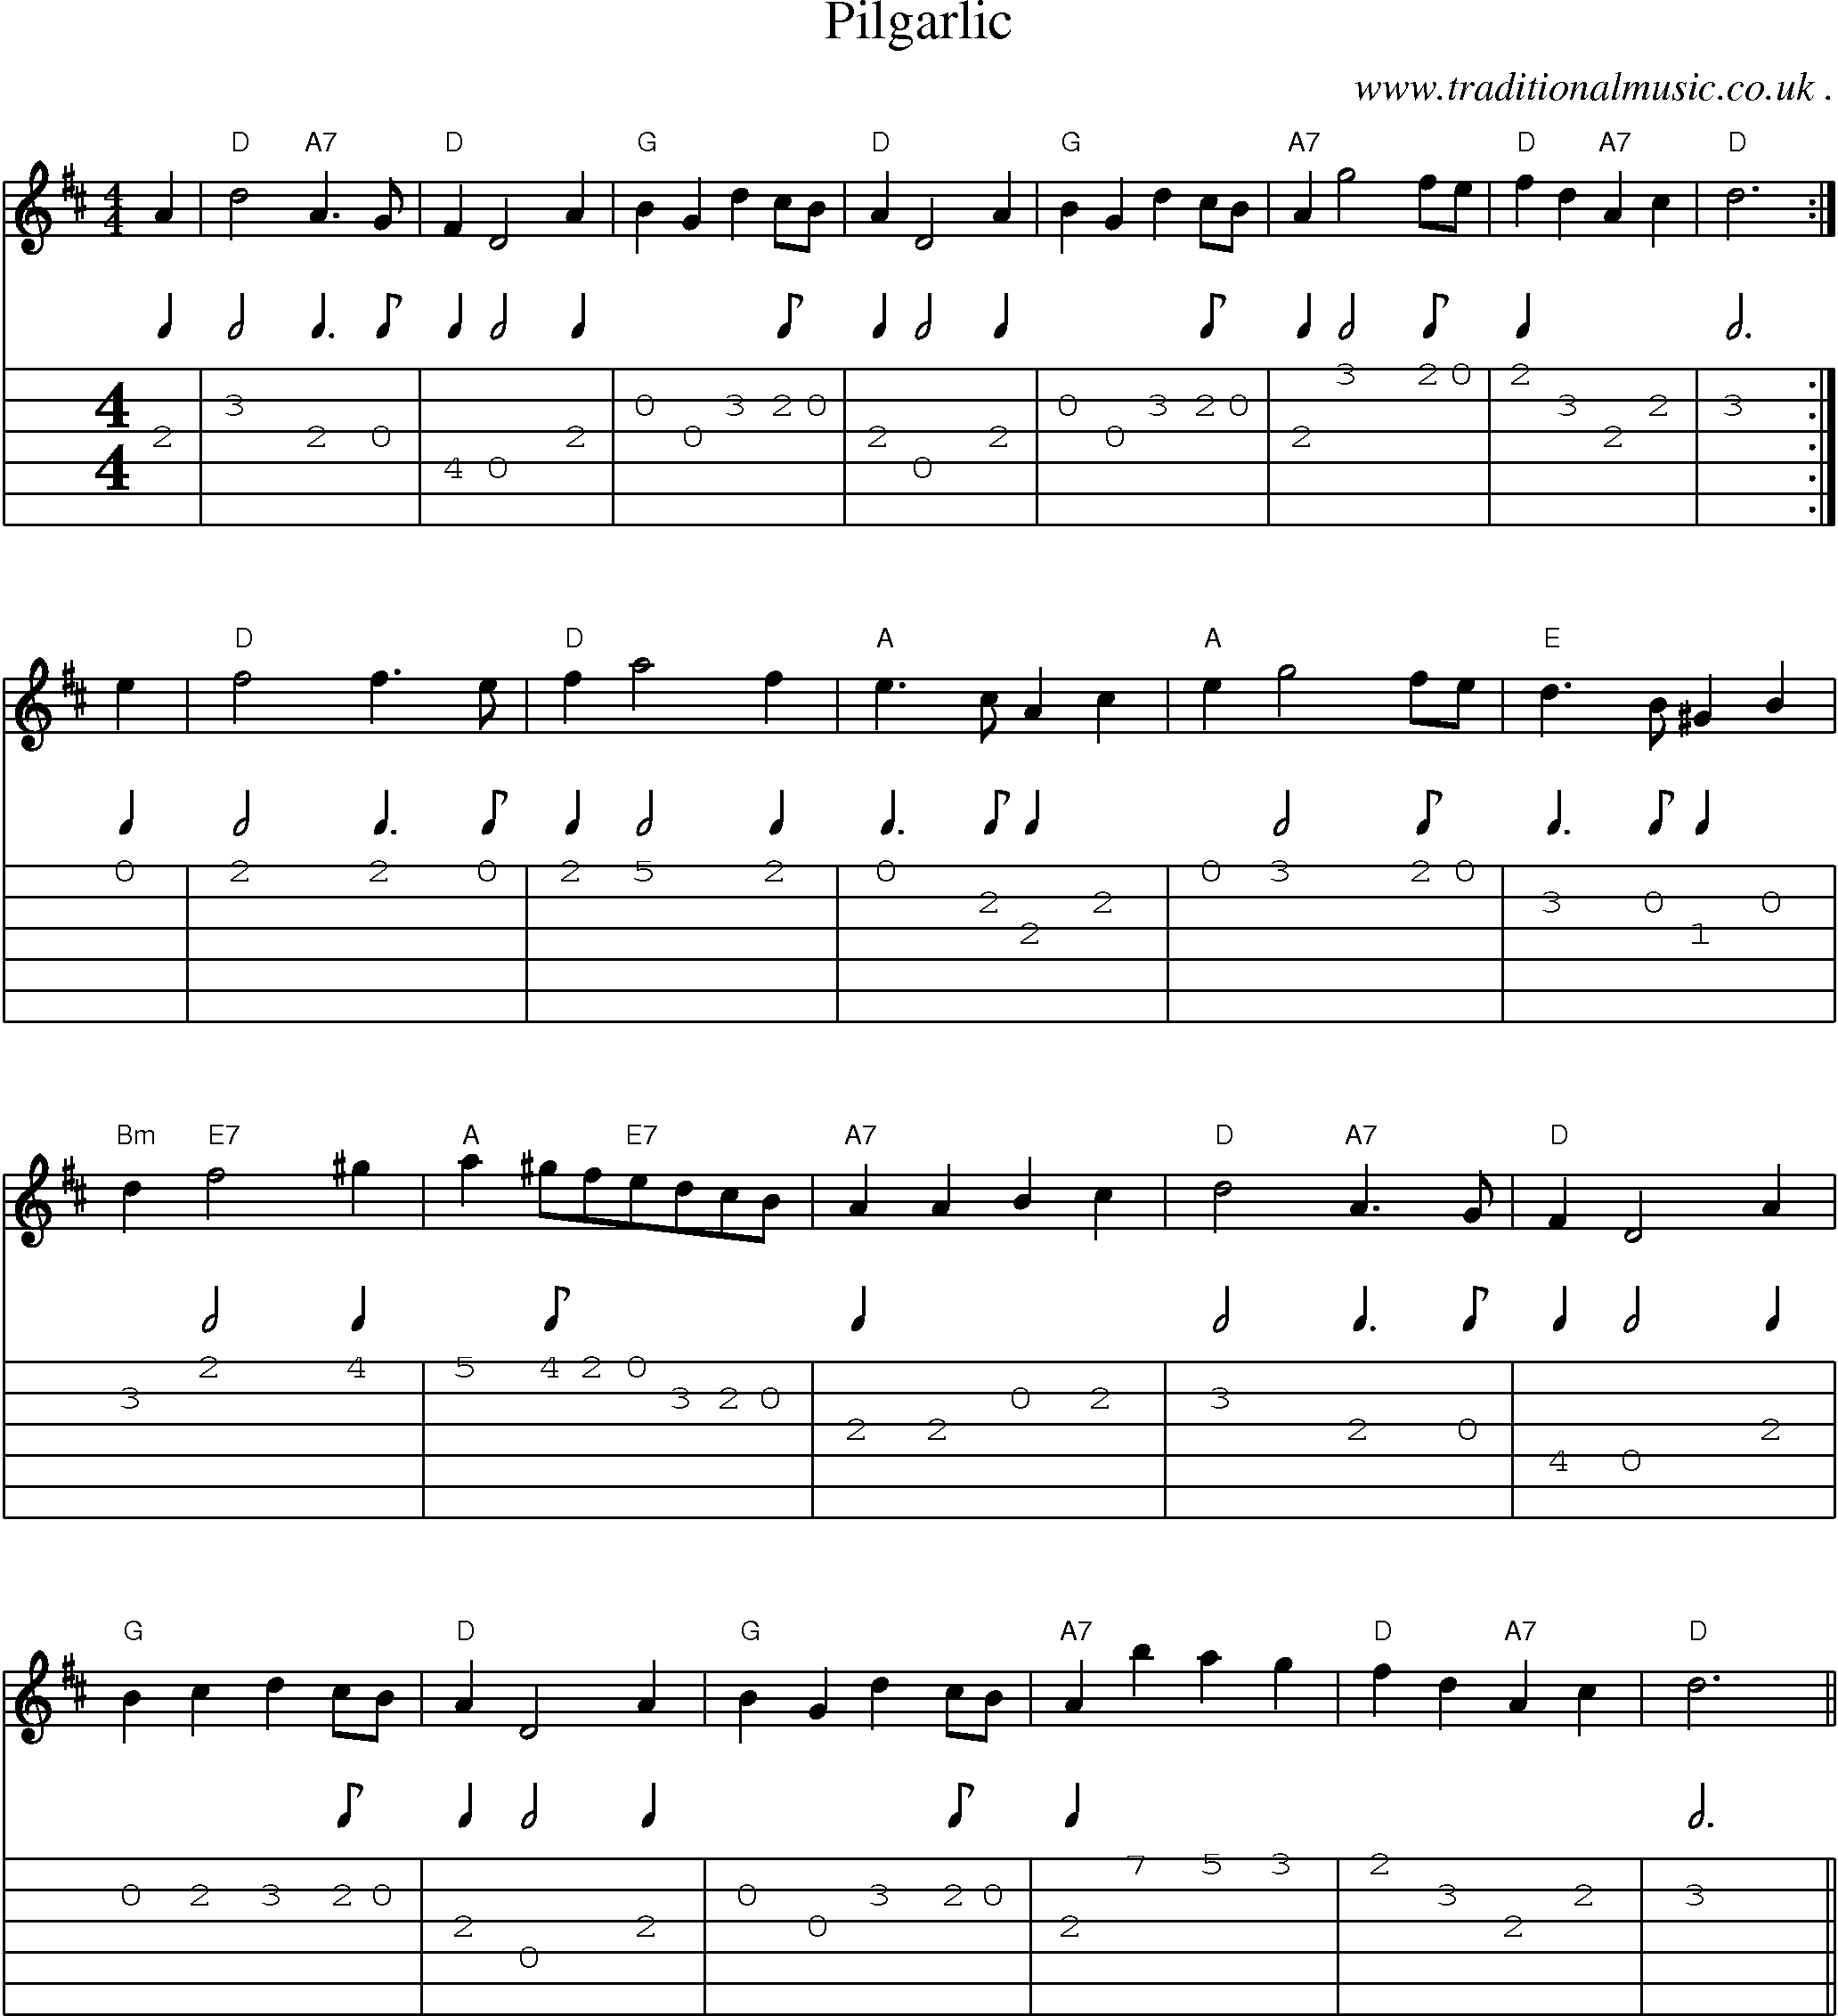 Sheet-Music and Guitar Tabs for Pilgarlic